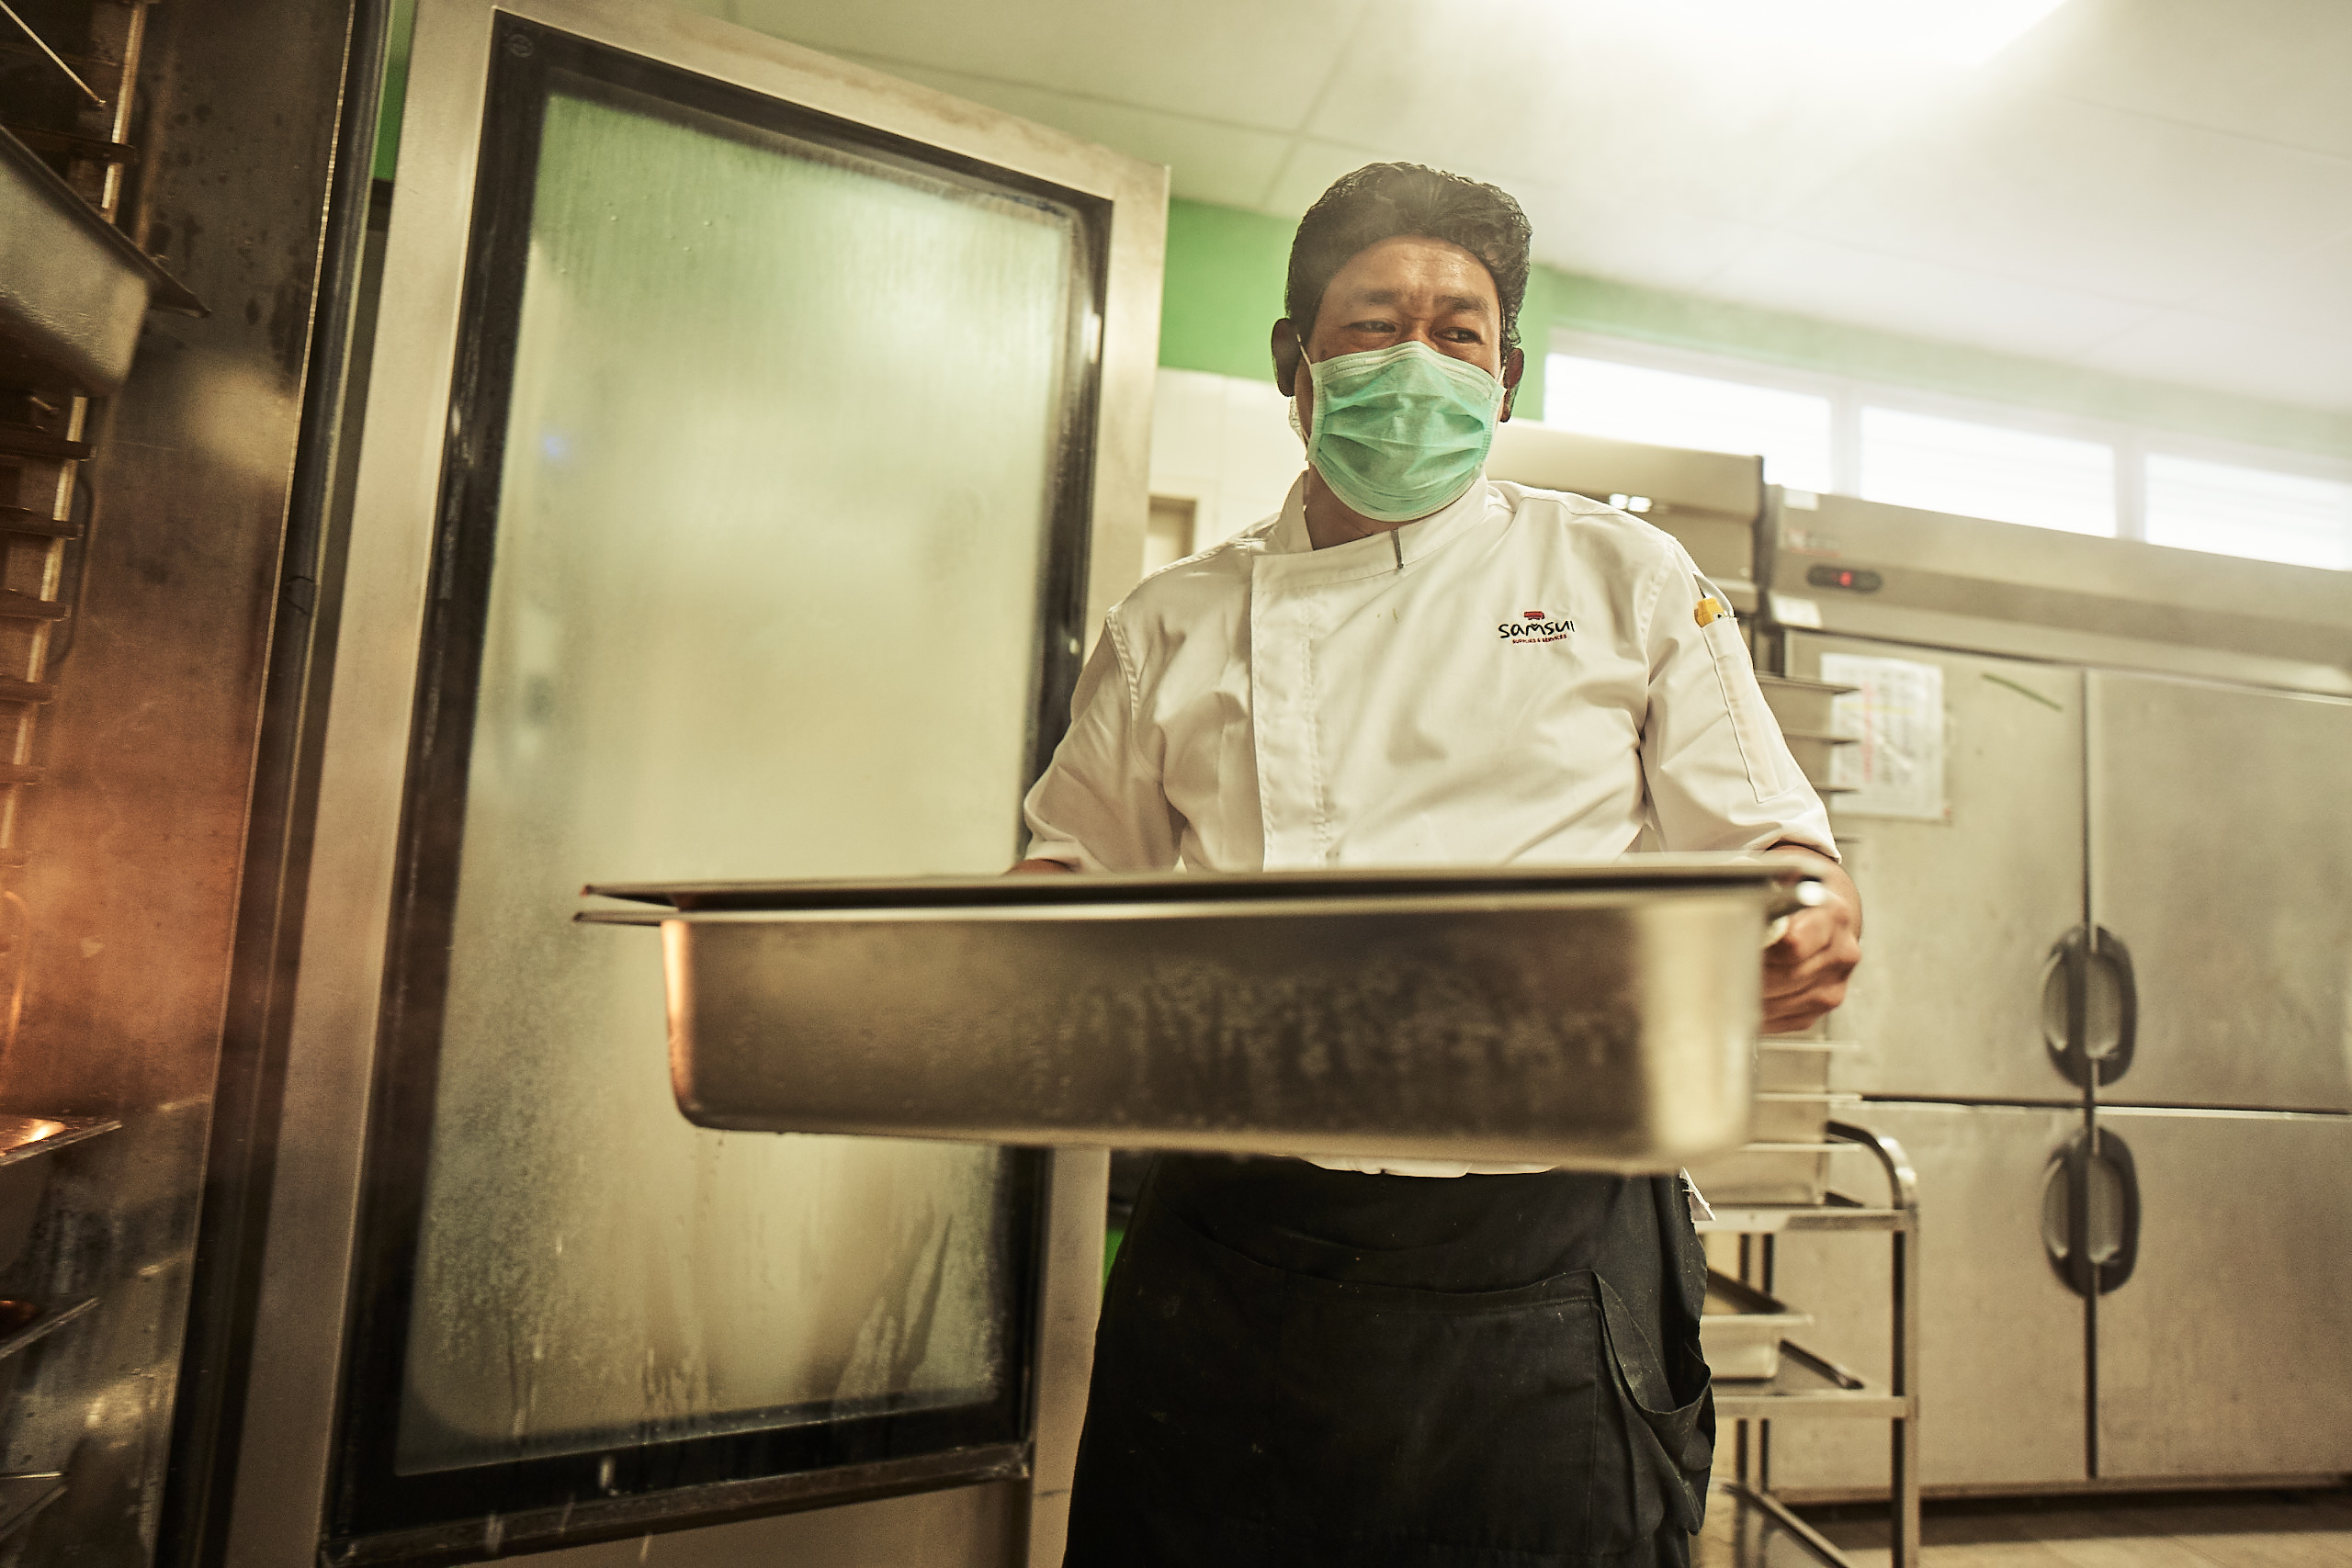 A chef is taking food out from an oven